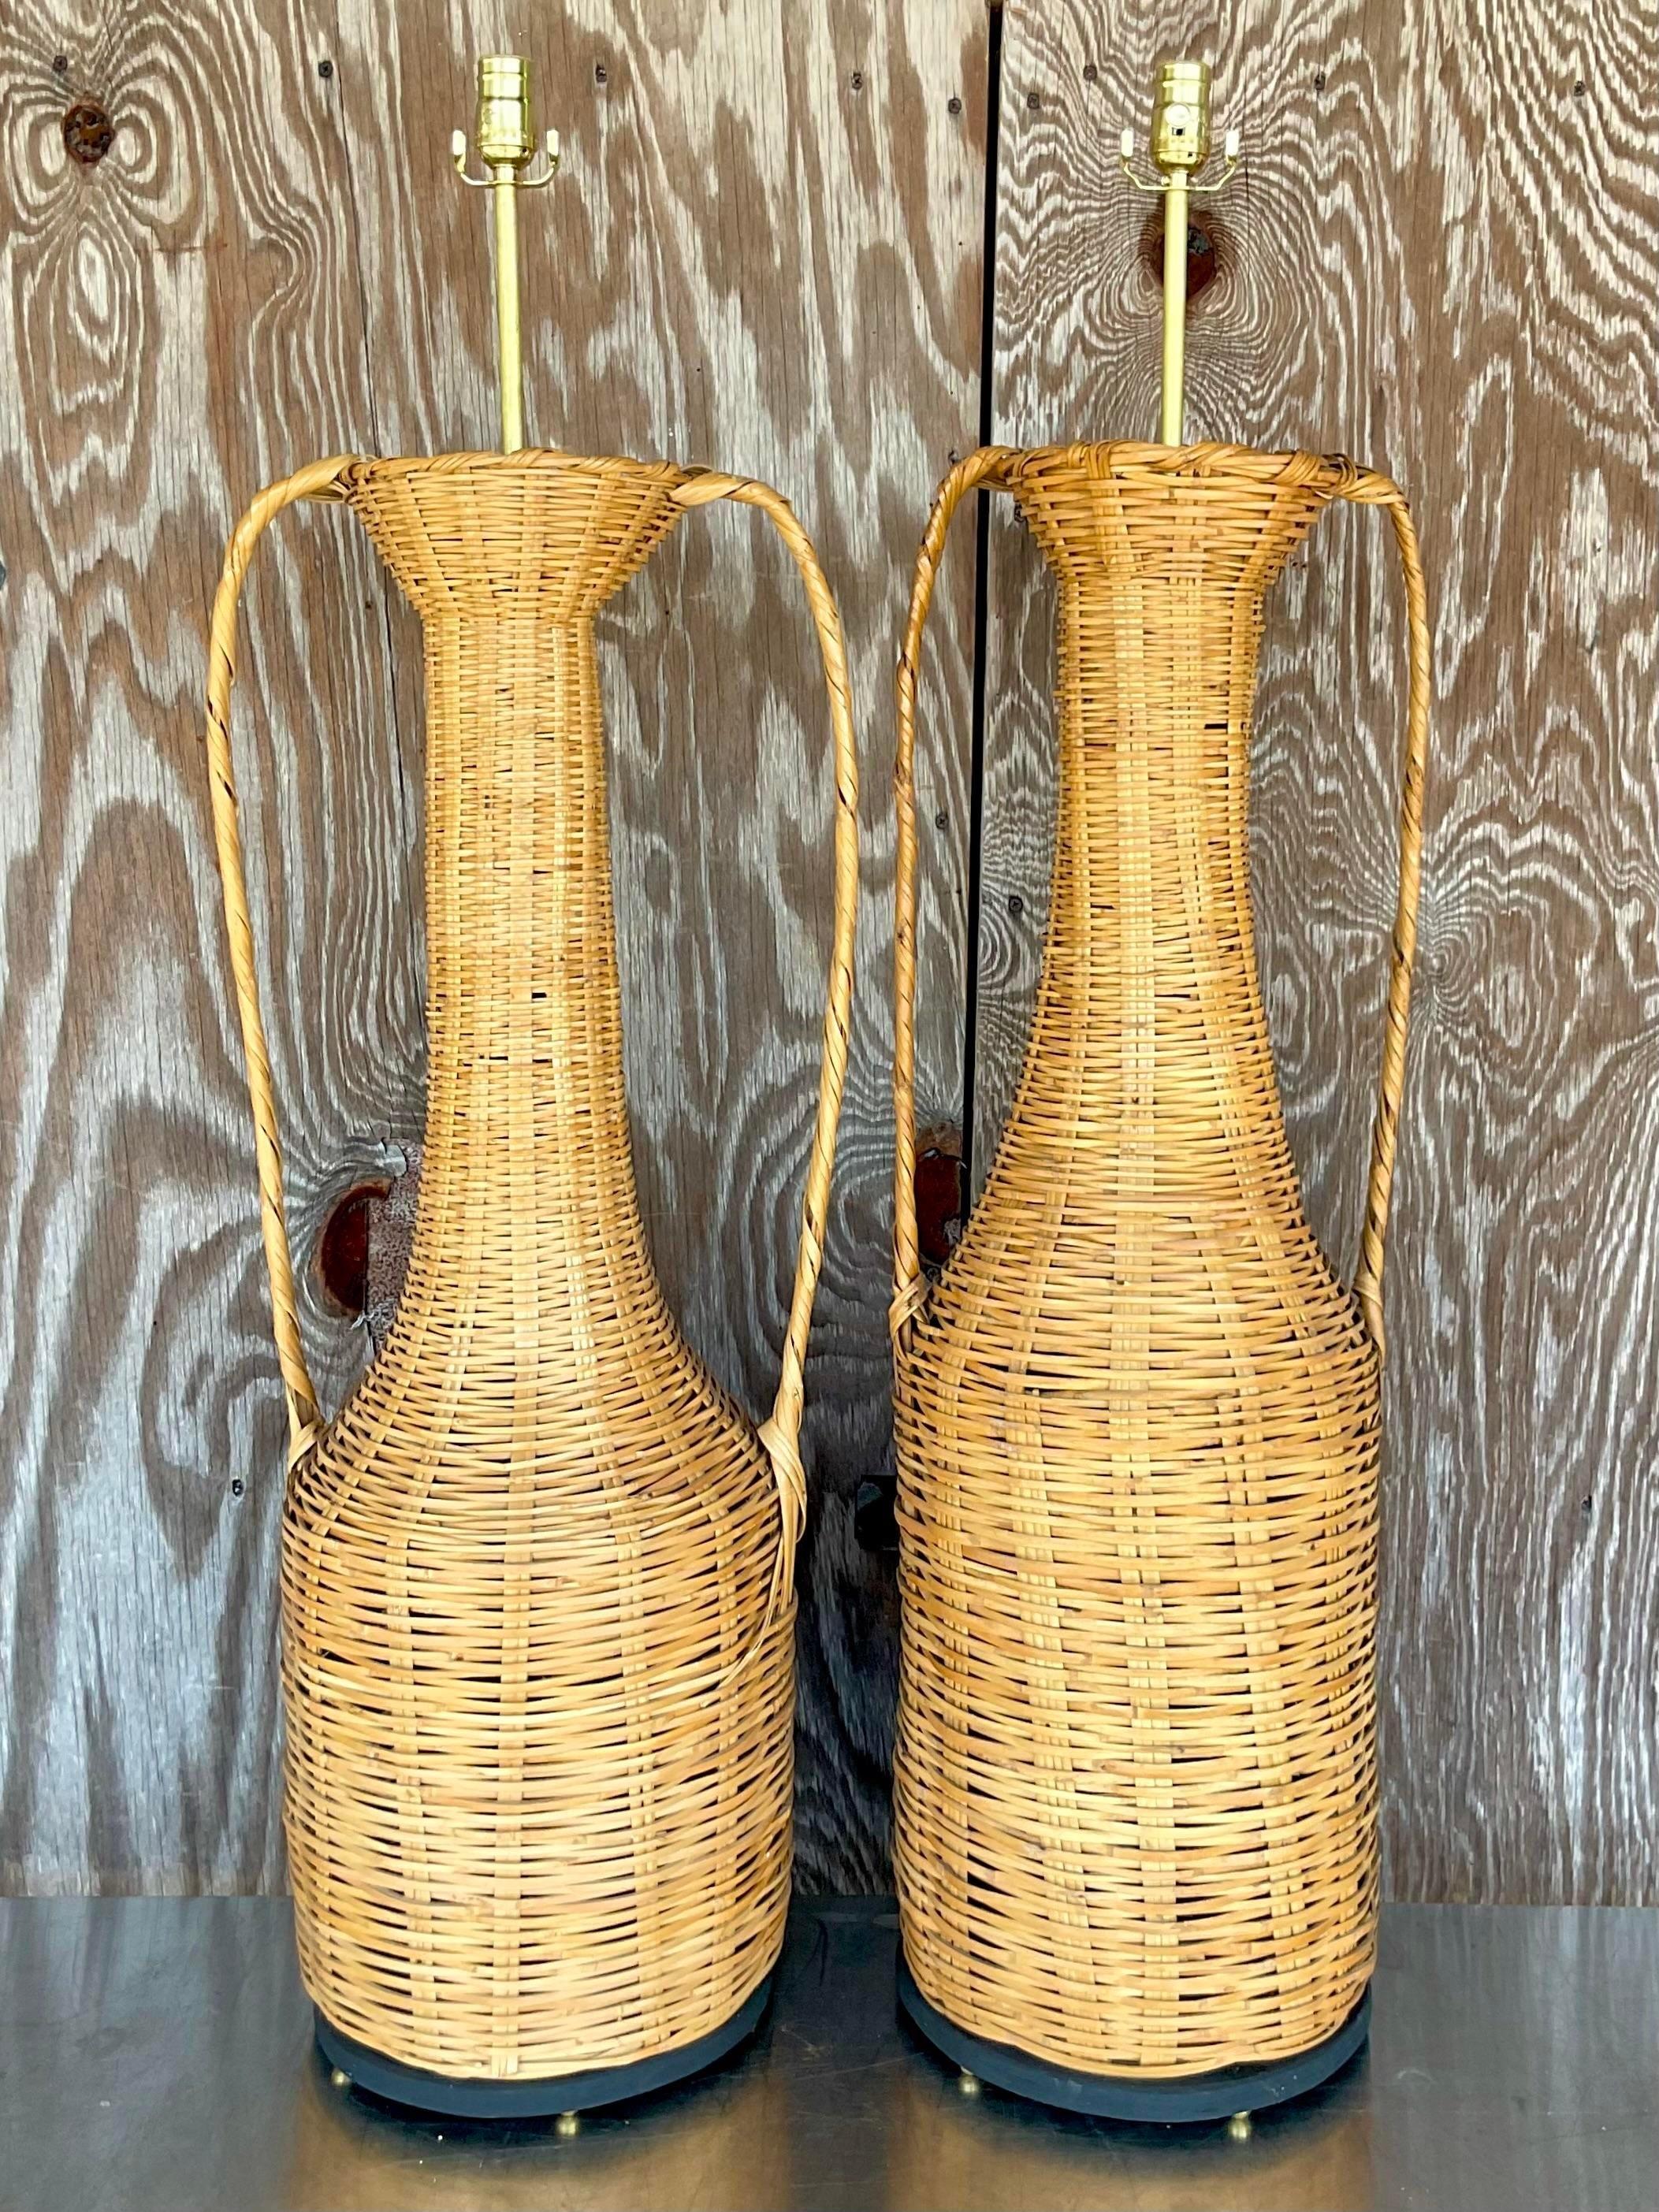 20th Century Vintage Boho Woven Rattan Urn Lamps - Set of 2 For Sale